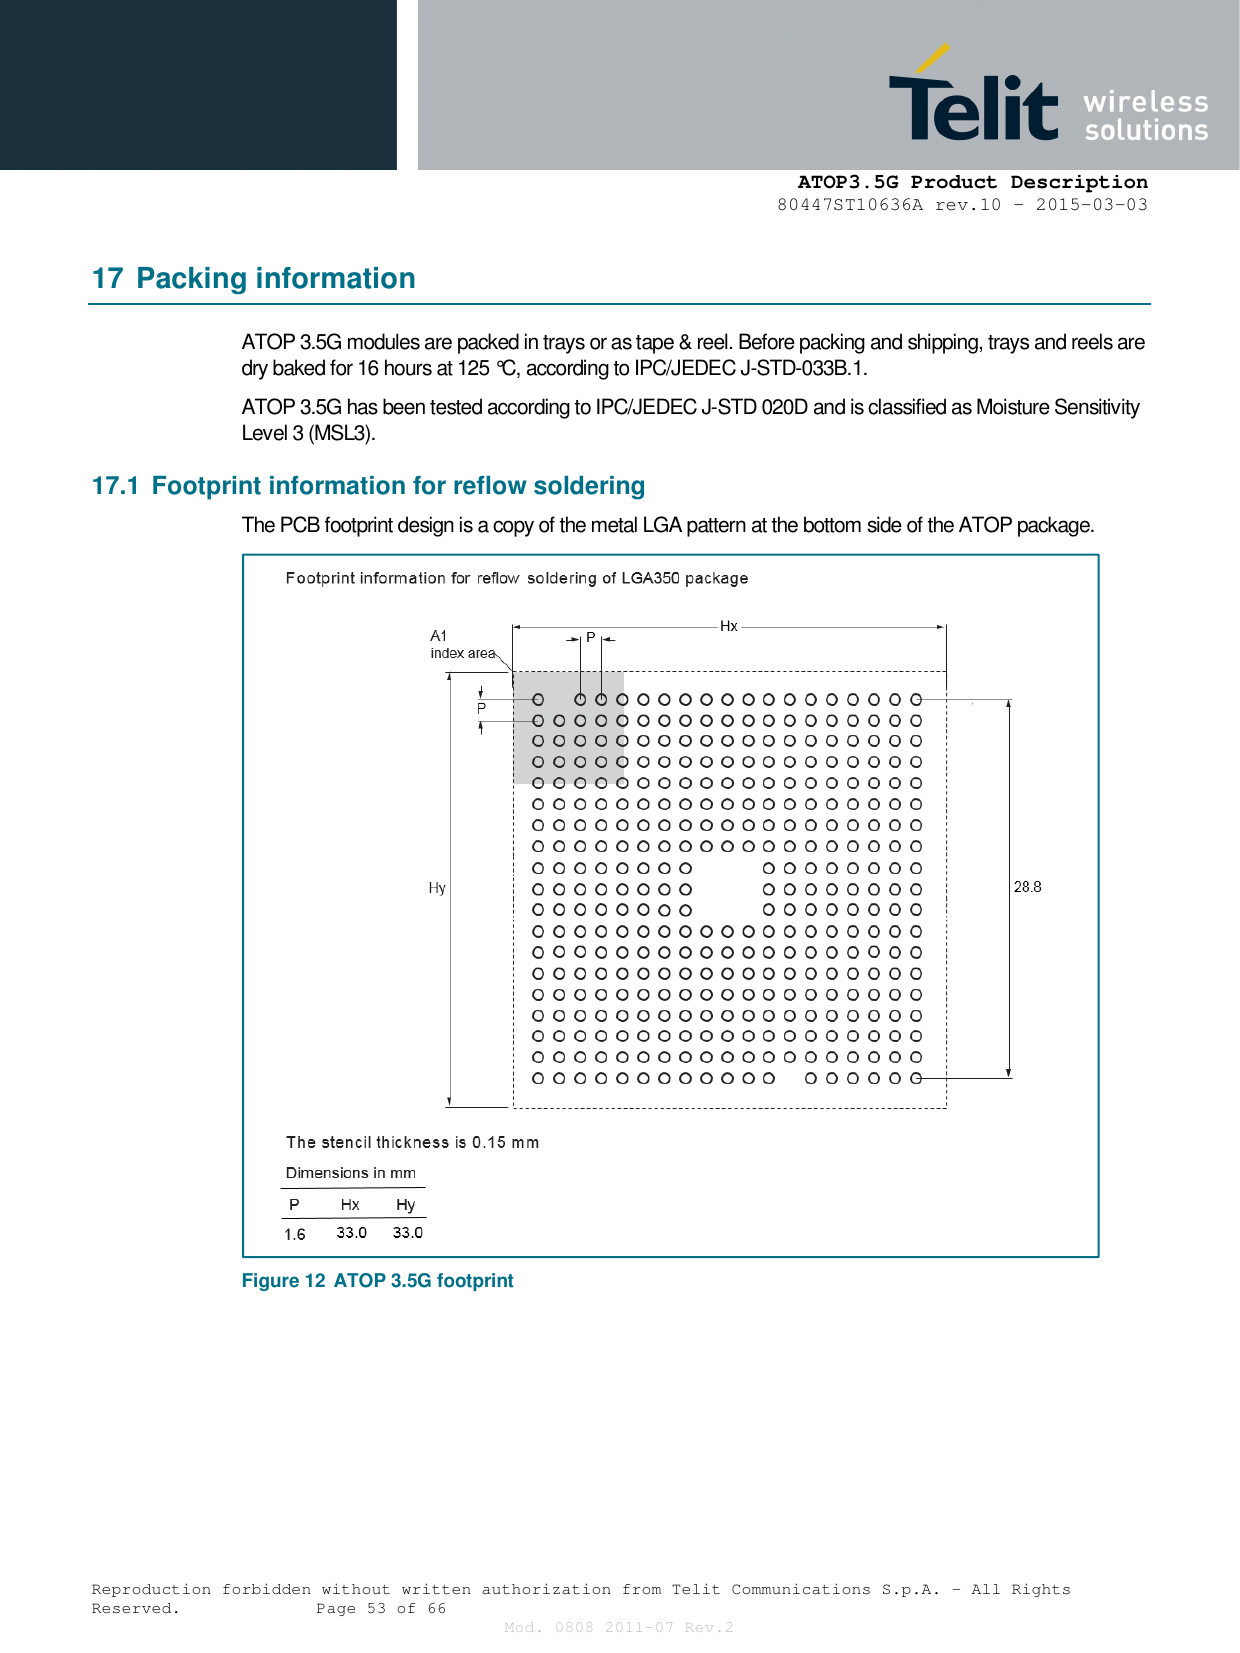      ATOP3.5G Product Description   80447ST10636A rev.10 – 2015-03-03  Reproduction forbidden without written authorization from Telit Communications S.p.A. - All Rights Reserved.    Page 53 of 66 Mod. 0808 2011-07 Rev.2 17 Packing information ATOP 3.5G modules are packed in trays or as tape &amp; reel. Before packing and shipping, trays and reels are dry baked for 16 hours at 125 °C, according to IPC/JEDEC J-STD-033B.1. ATOP 3.5G has been tested according to IPC/JEDEC J-STD 020D and is classified as Moisture Sensitivity Level 3 (MSL3). 17.1  Footprint information for reflow soldering The PCB footprint design is a copy of the metal LGA pattern at the bottom side of the ATOP package. Figure 12  ATOP 3.5G footprint   